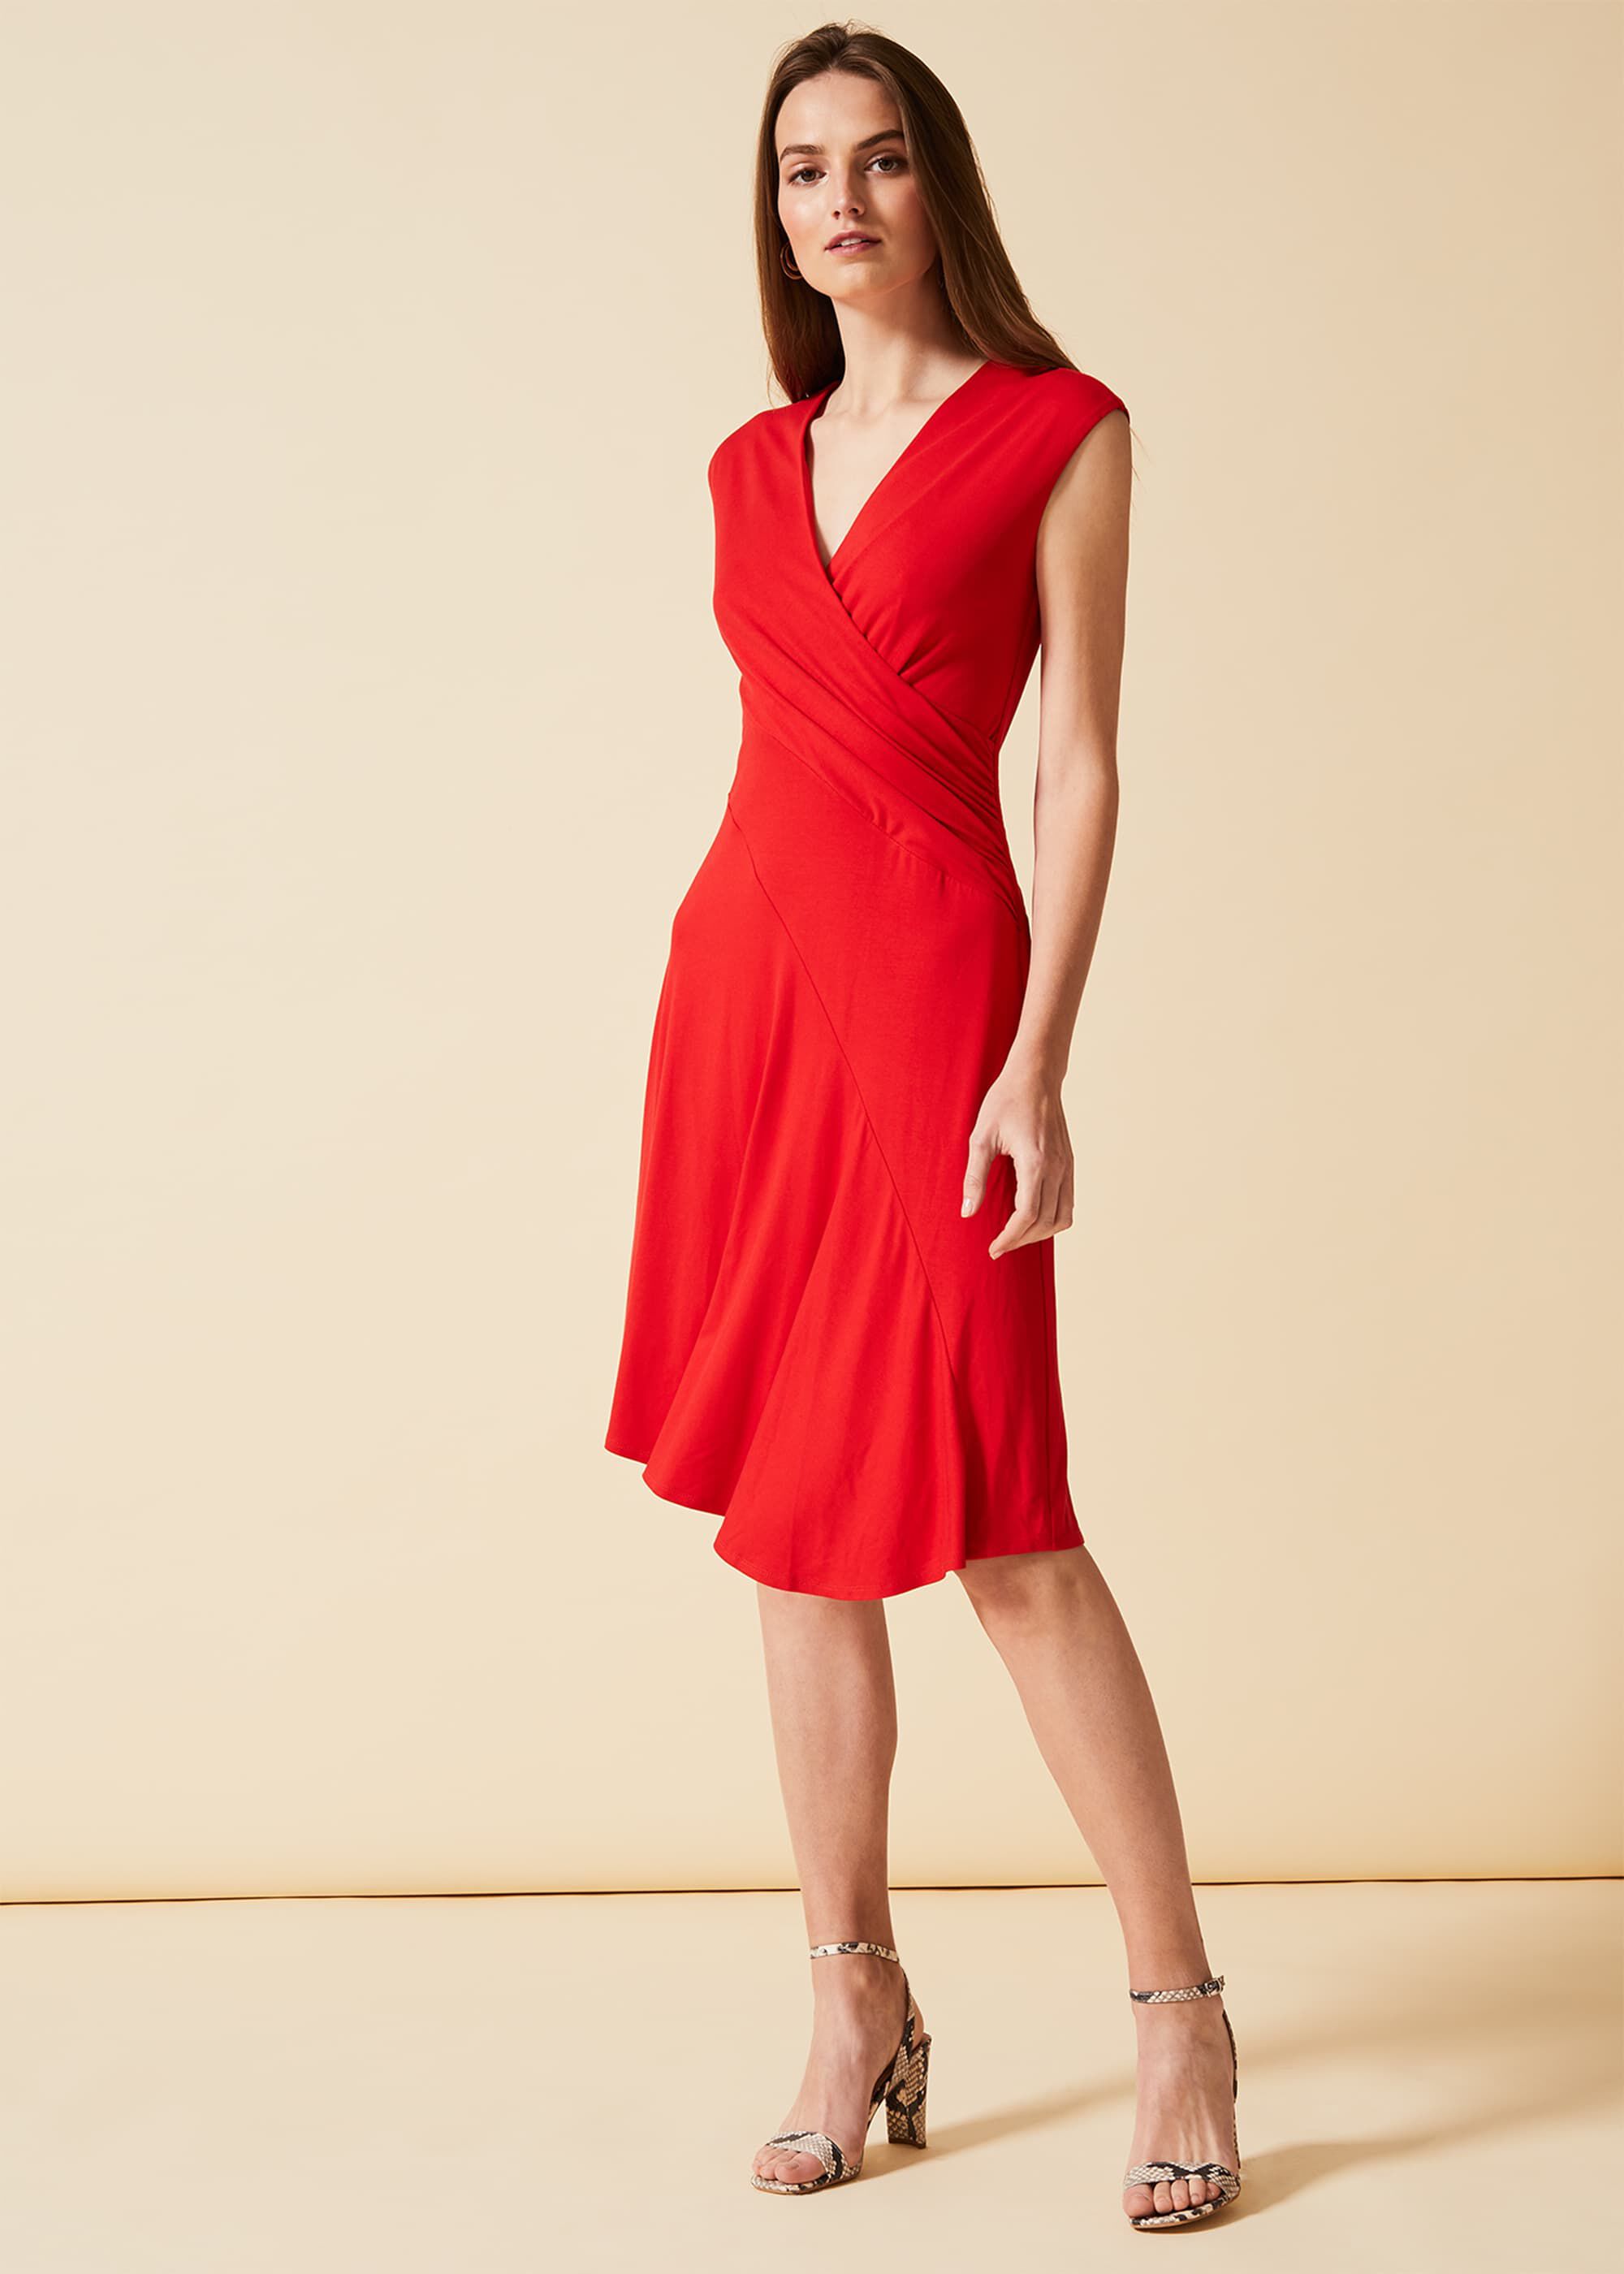 Phase Eight Dresses on Sale, UP TO 68% OFF | www.editorialelpirata.com